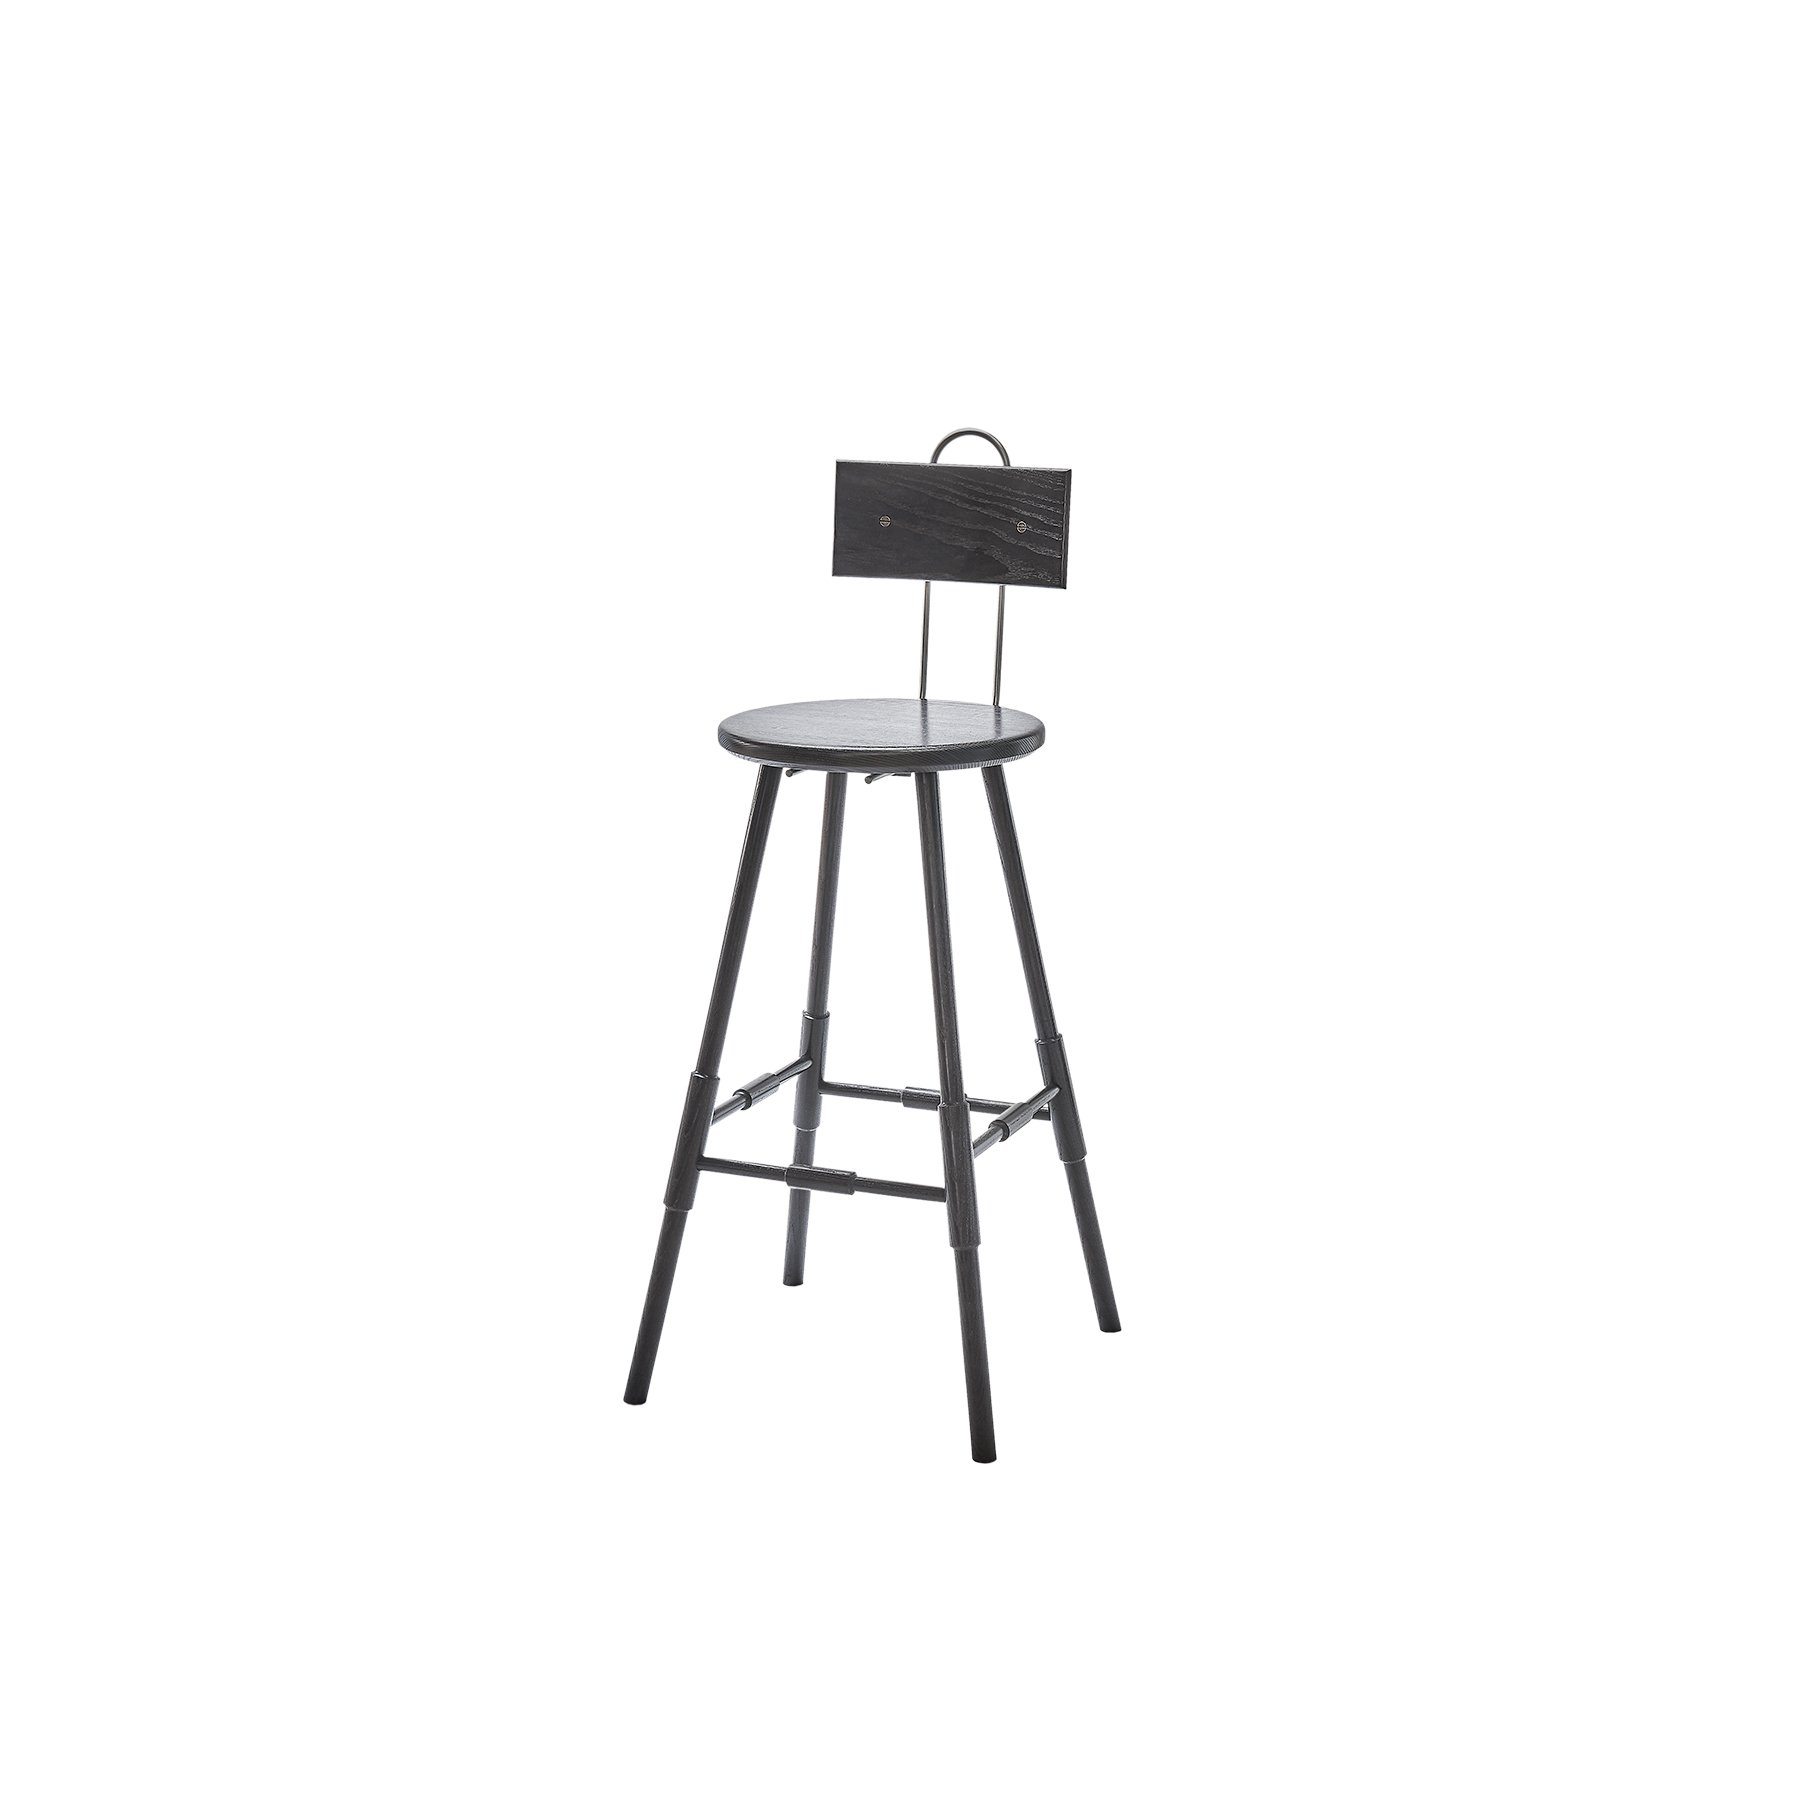 ATLANTIC STOOL WITH BACK 29" - $1,240